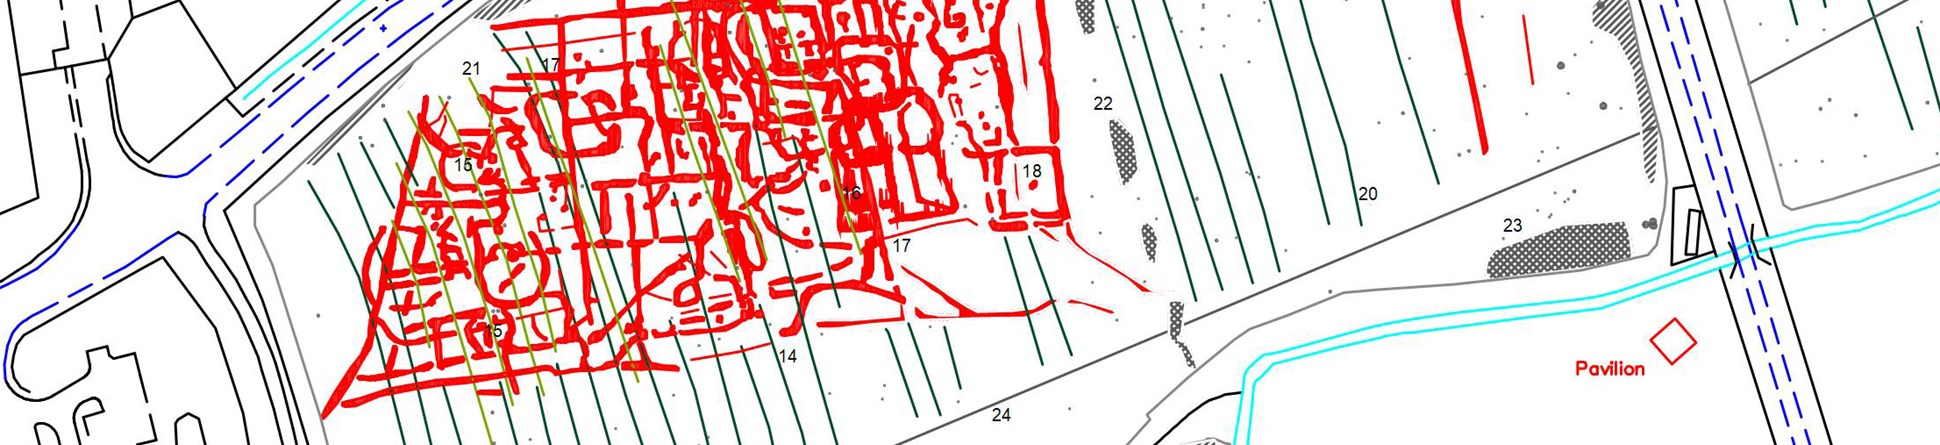 A digitally created map showing the archaeological features of Pamington, Gloucestershire